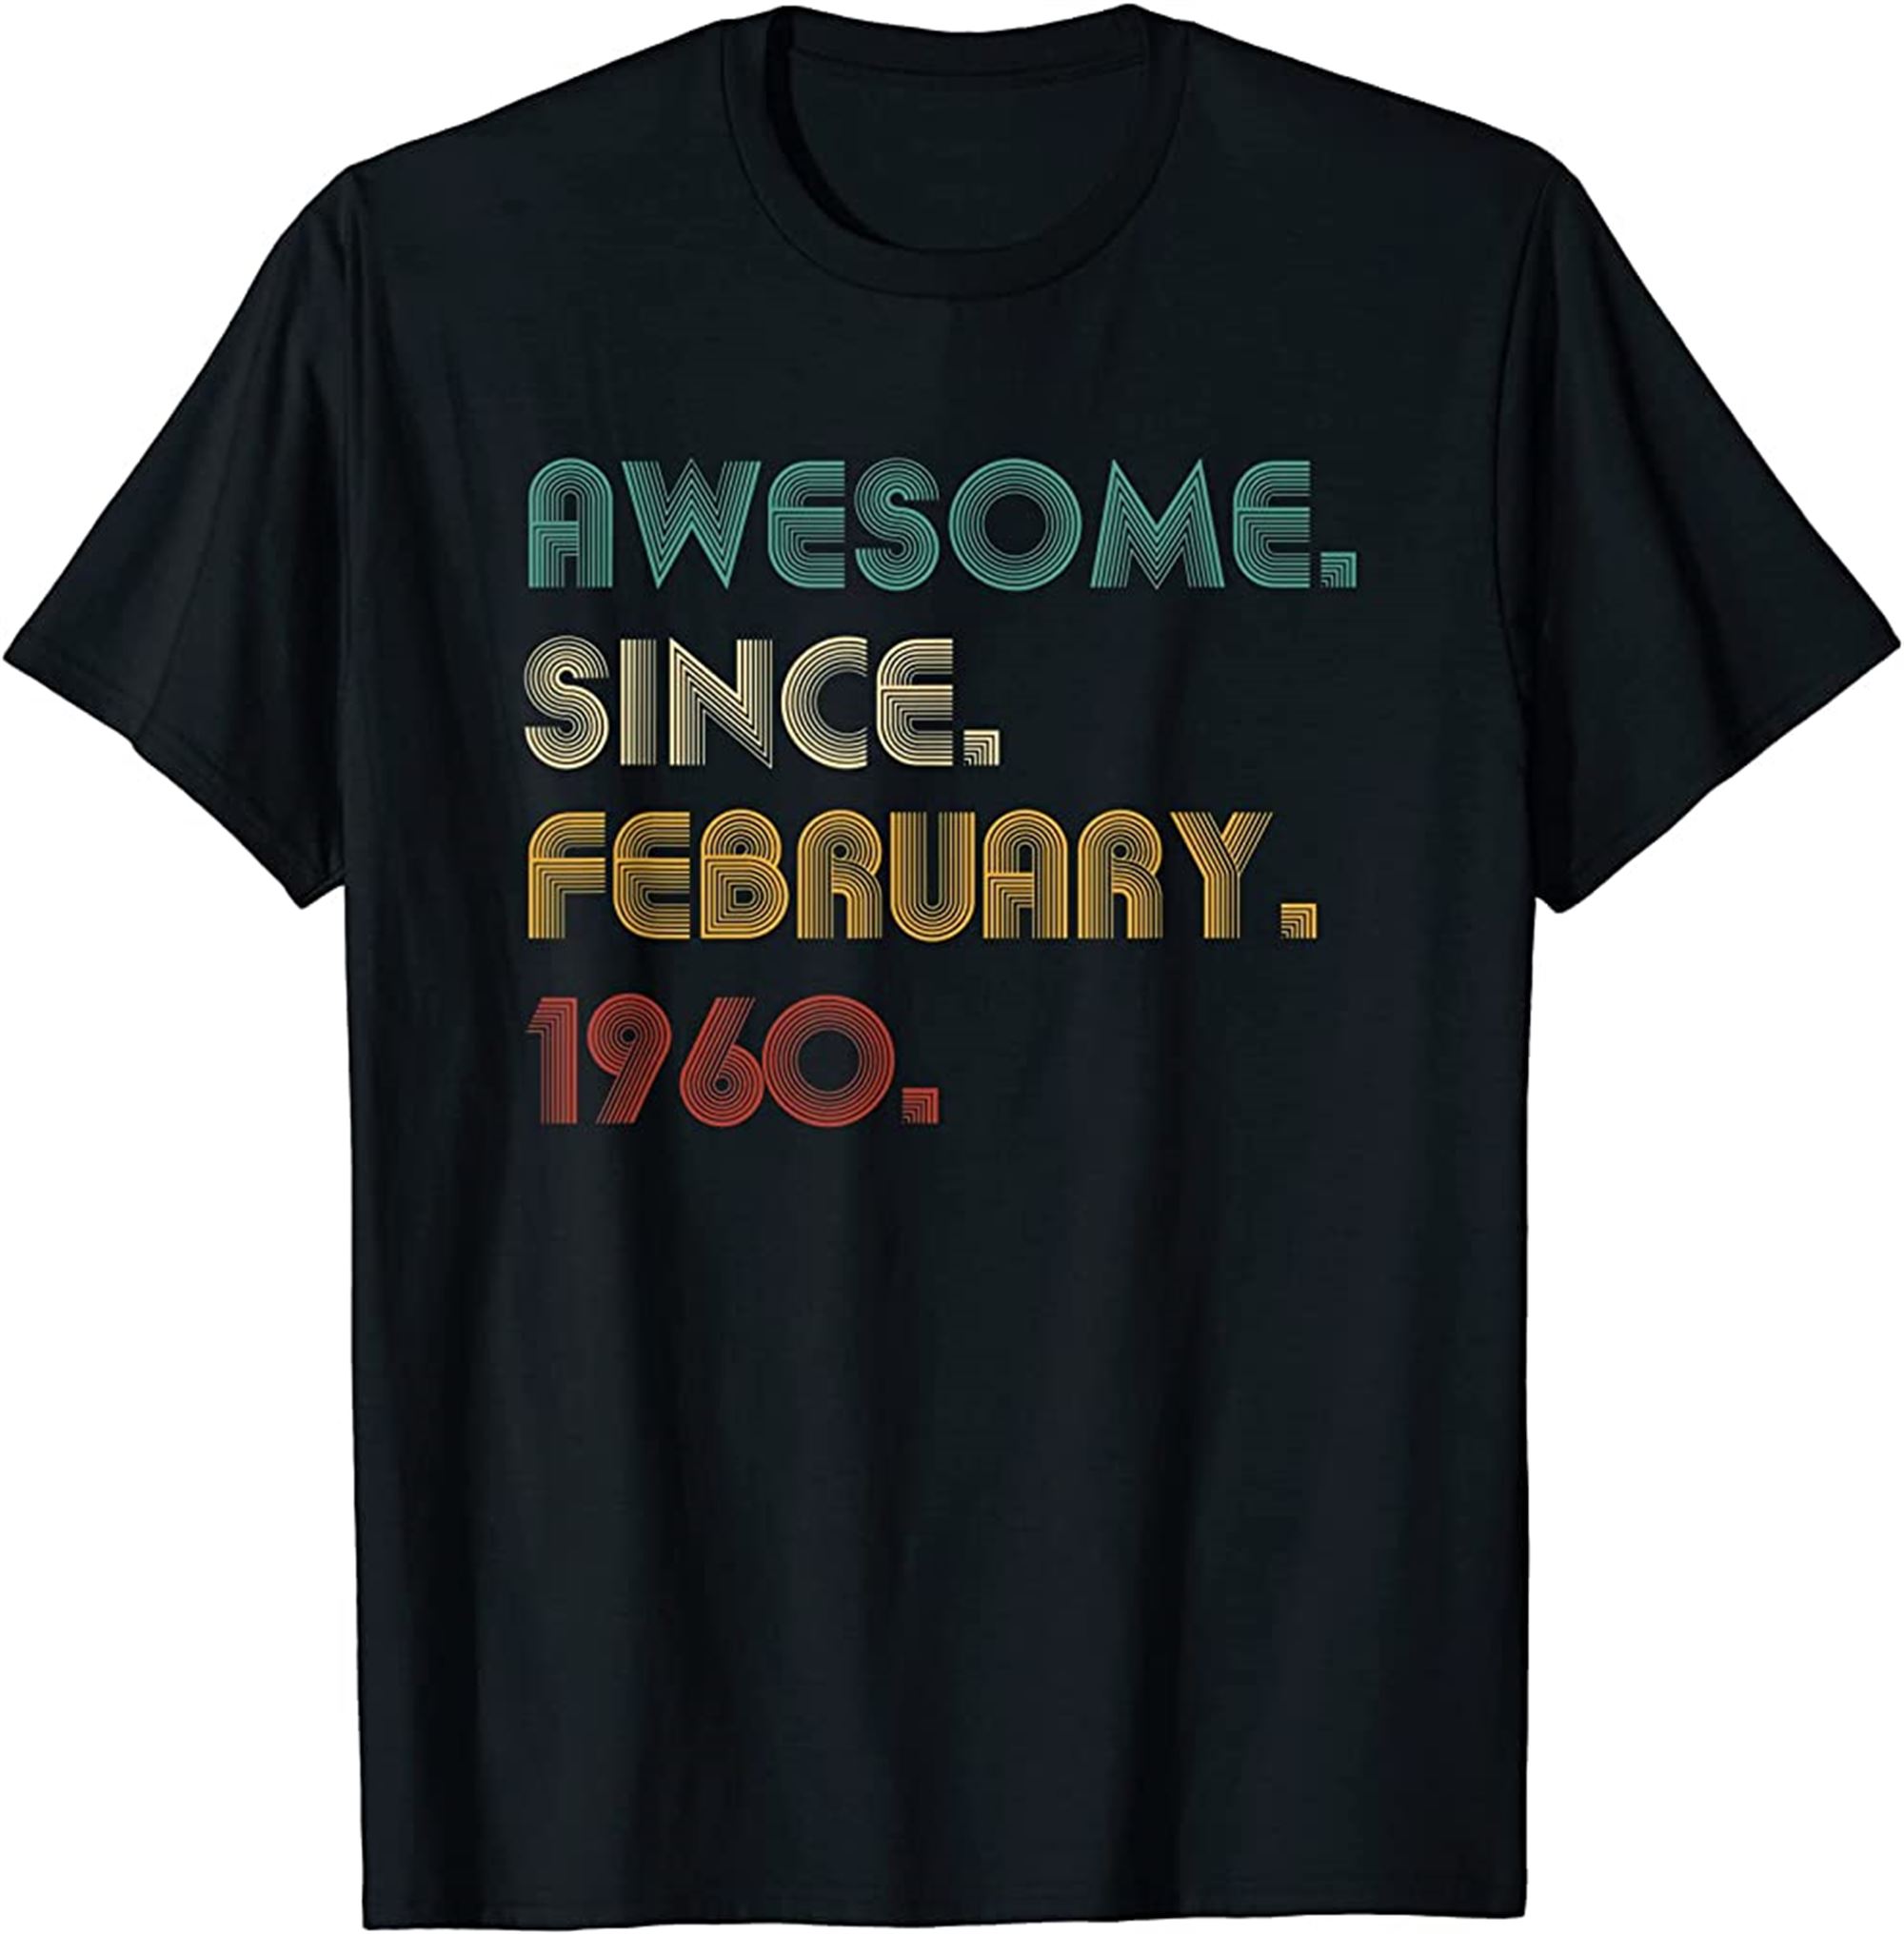 Awesome Since February 1960 62nd Birthday 62 Year Old Gift T-shirt Full Size Up To 5xl